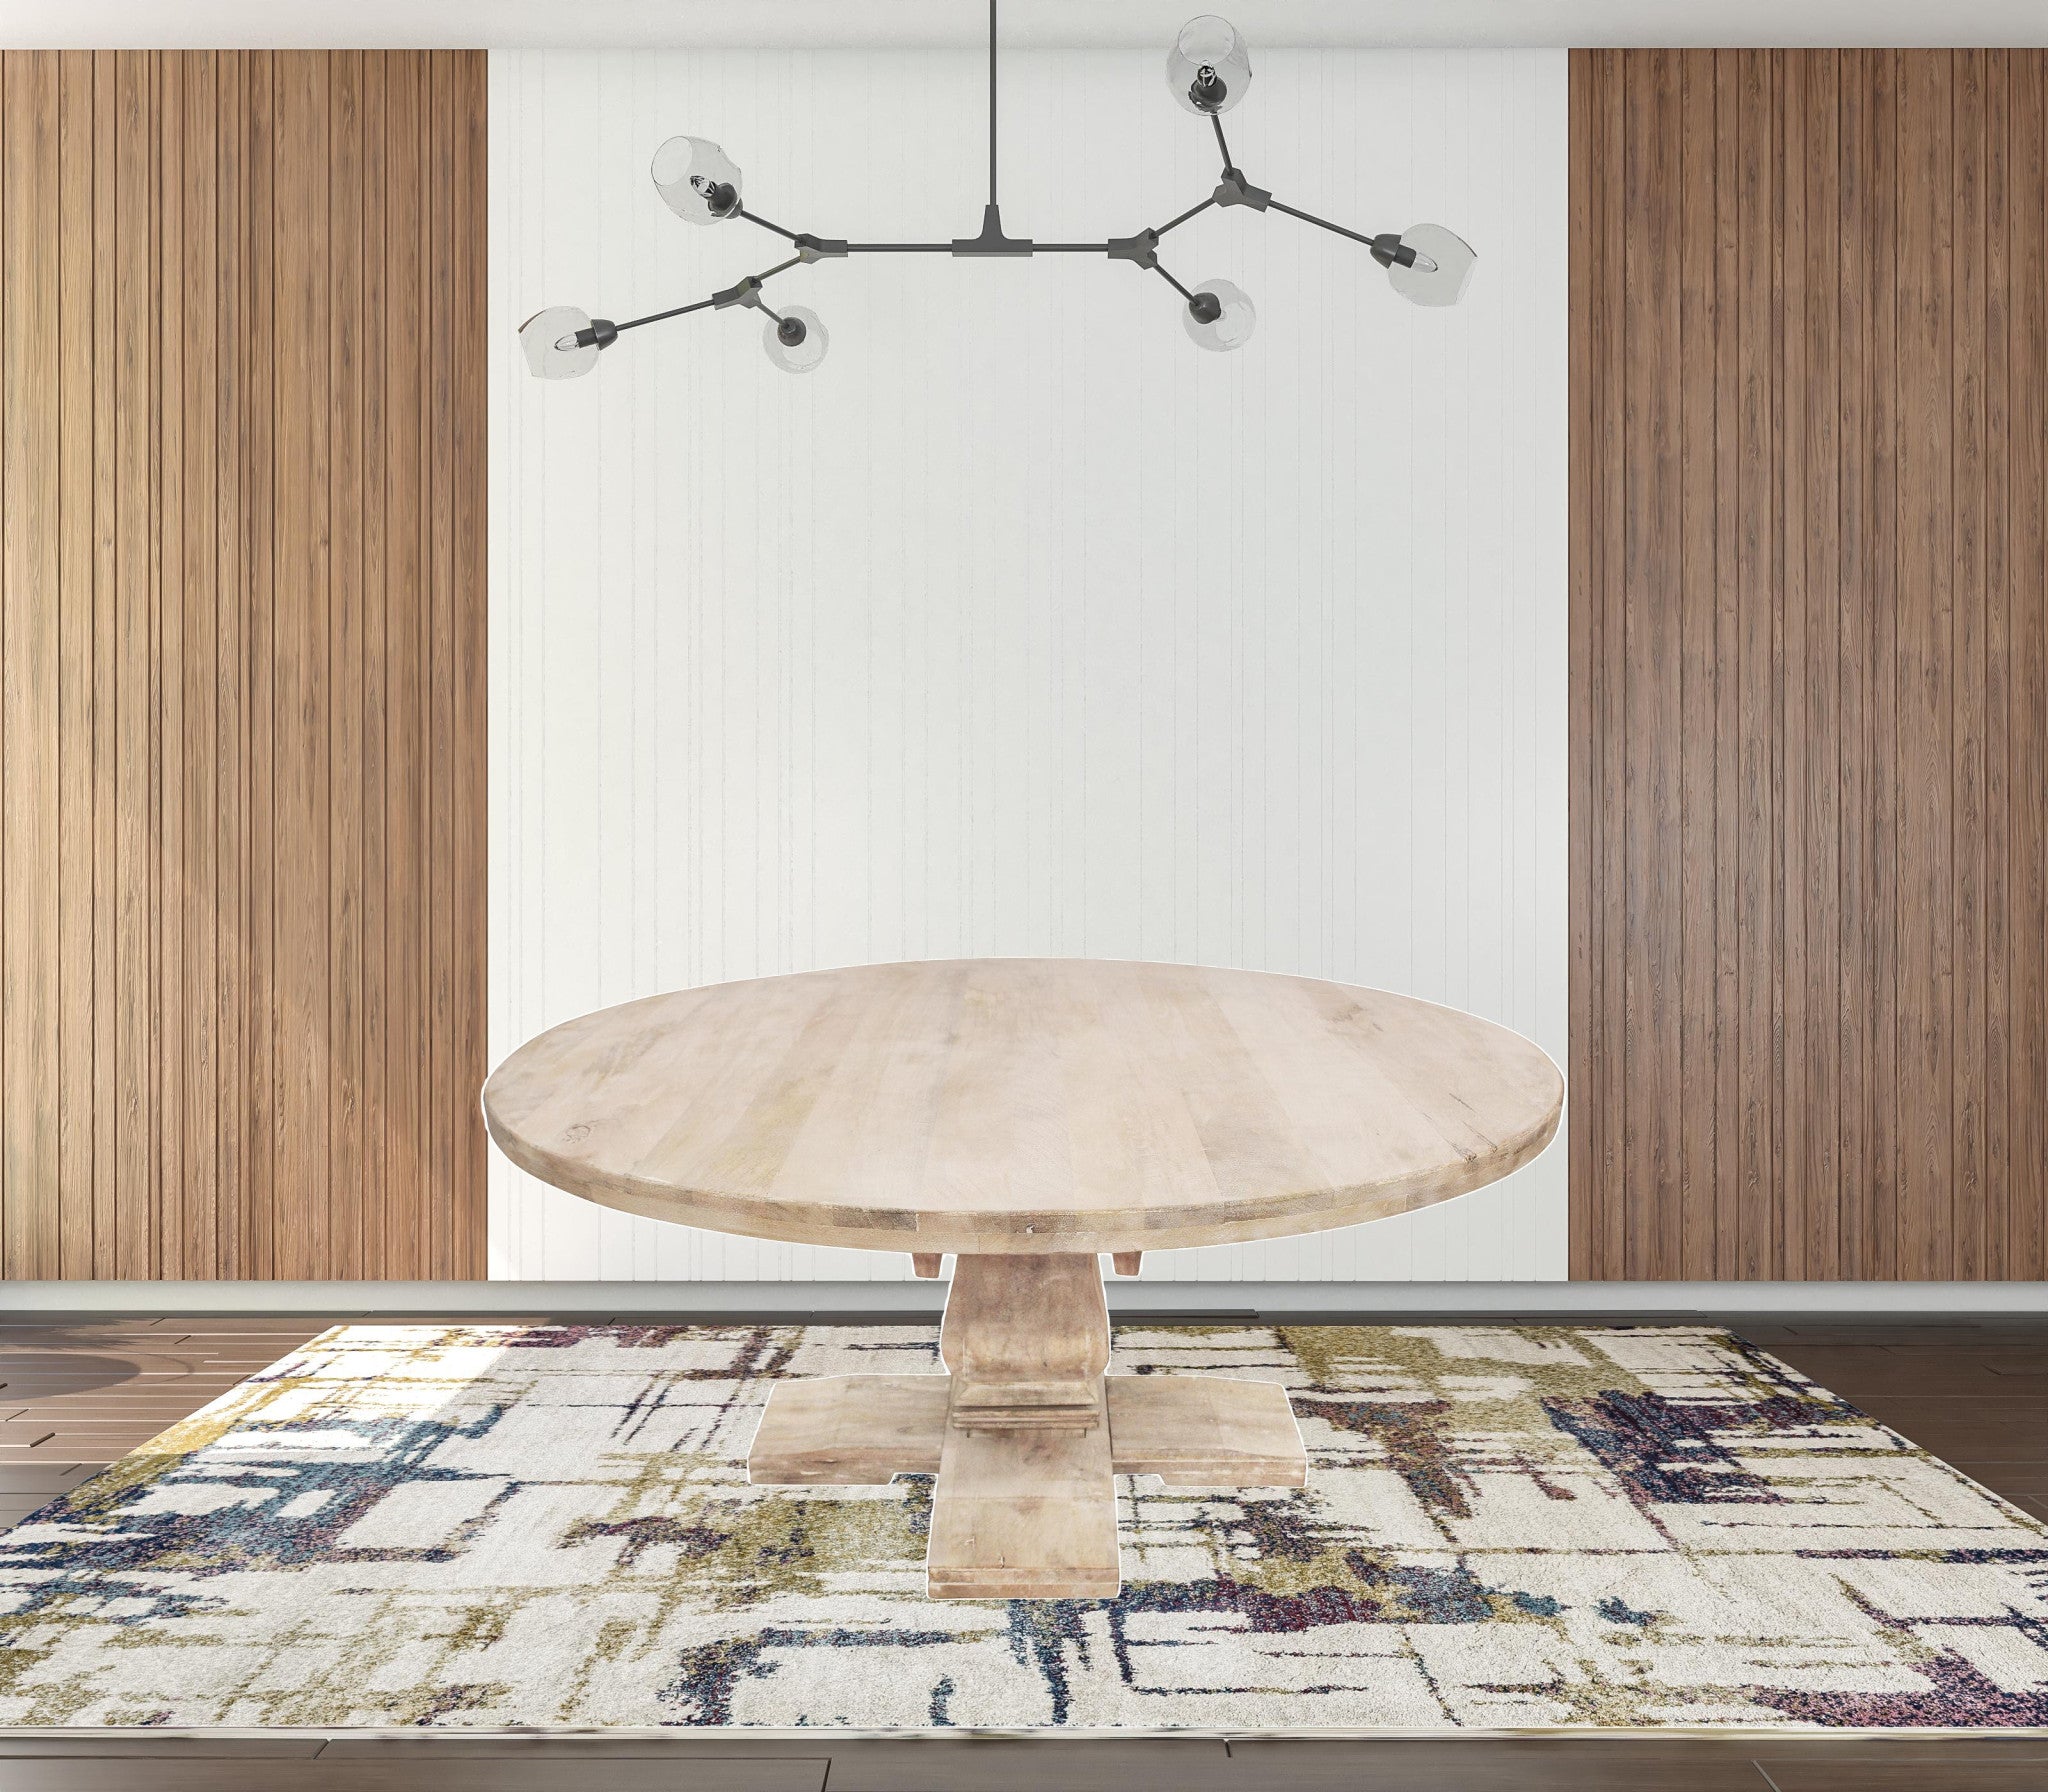 70" Light Brown Rounded Solid Wood Dining Table